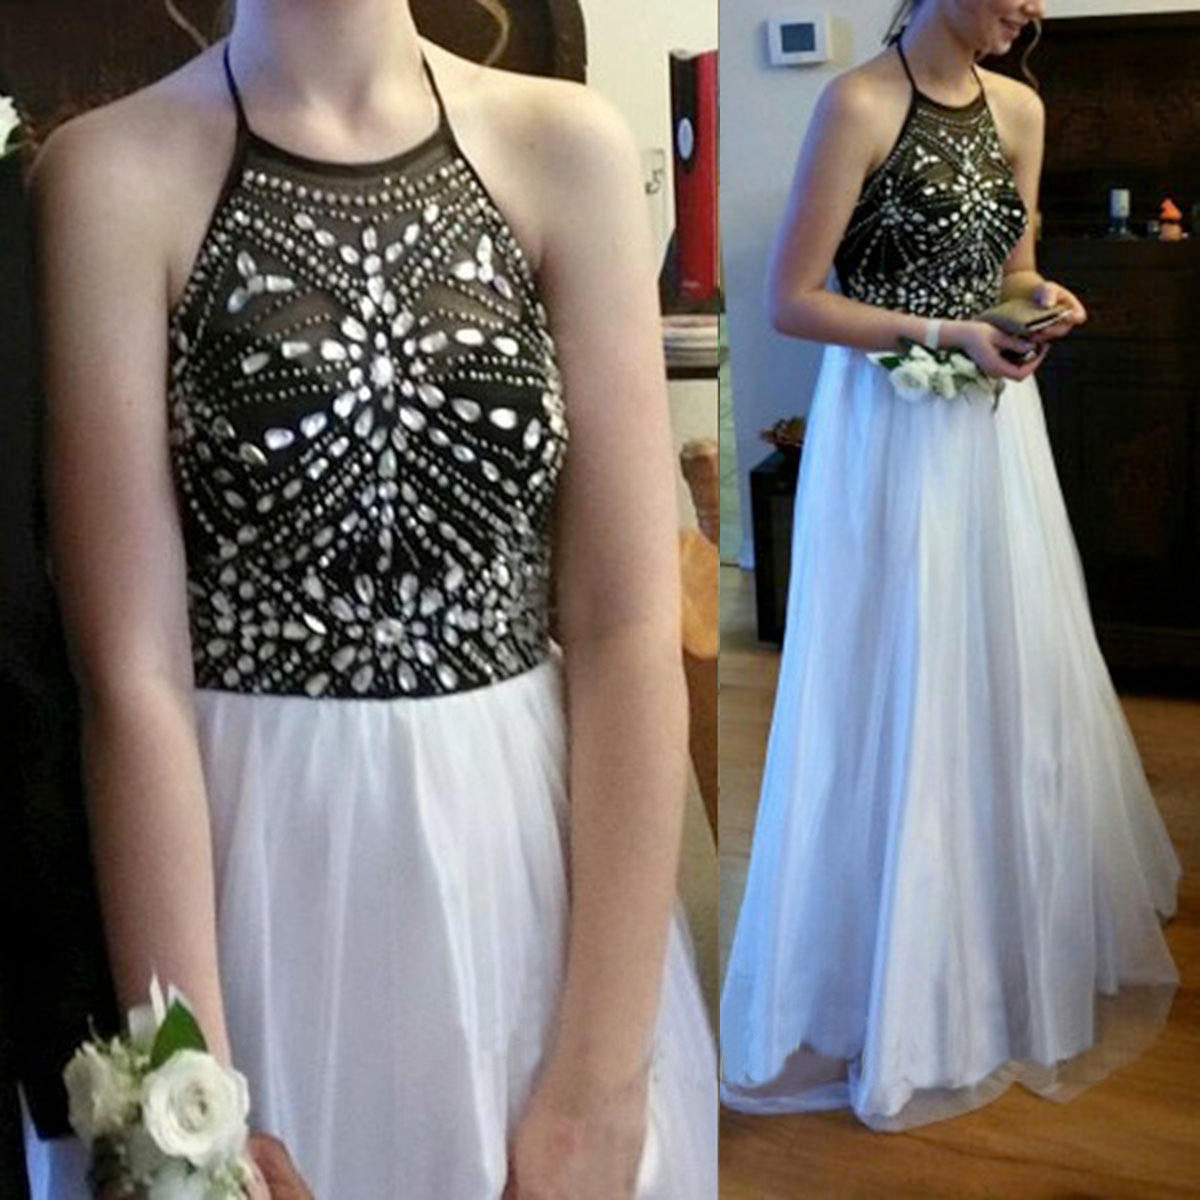 Long Prom Dress, Halter Prom Dress, White And Black Prom Dress, Prom Dress, Party Prom Dress, Halter Prom Dress, Long Evening Dress, 14916